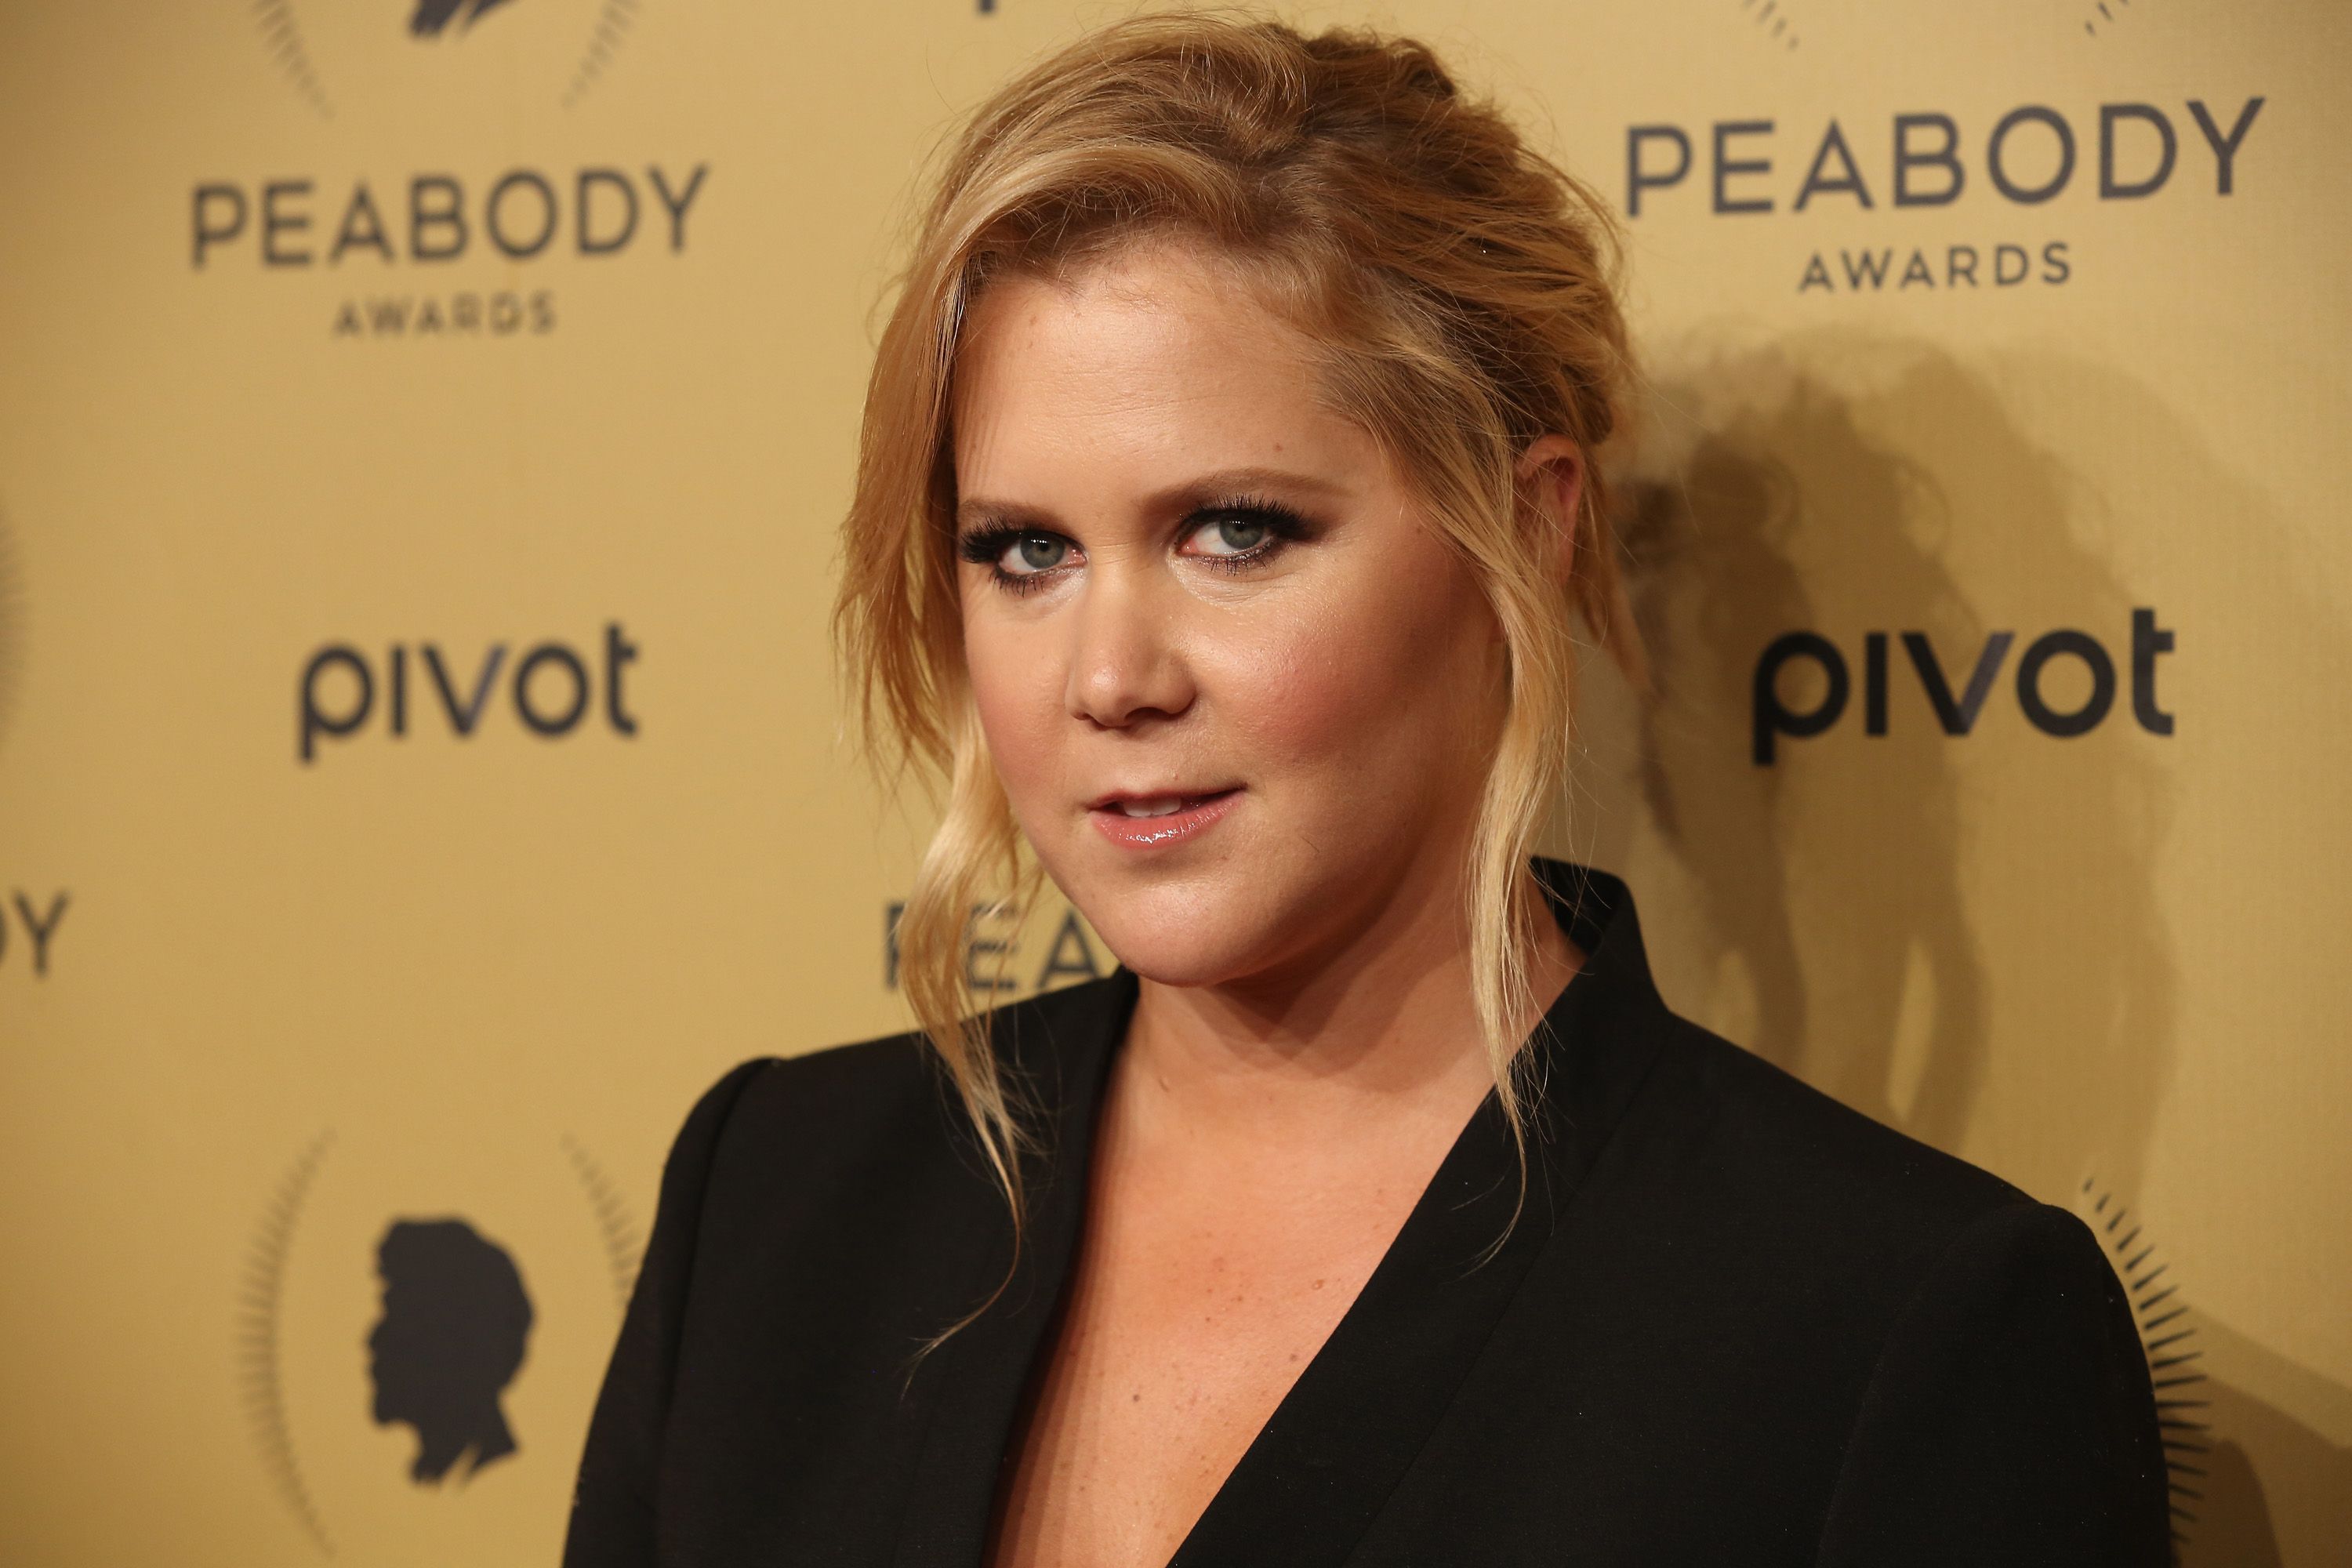  Amy Schumer at The 74th Annual Peabody Awards Ceremony at Cipriani Wall Street on May 31, 2015 | Photo: Getty Images